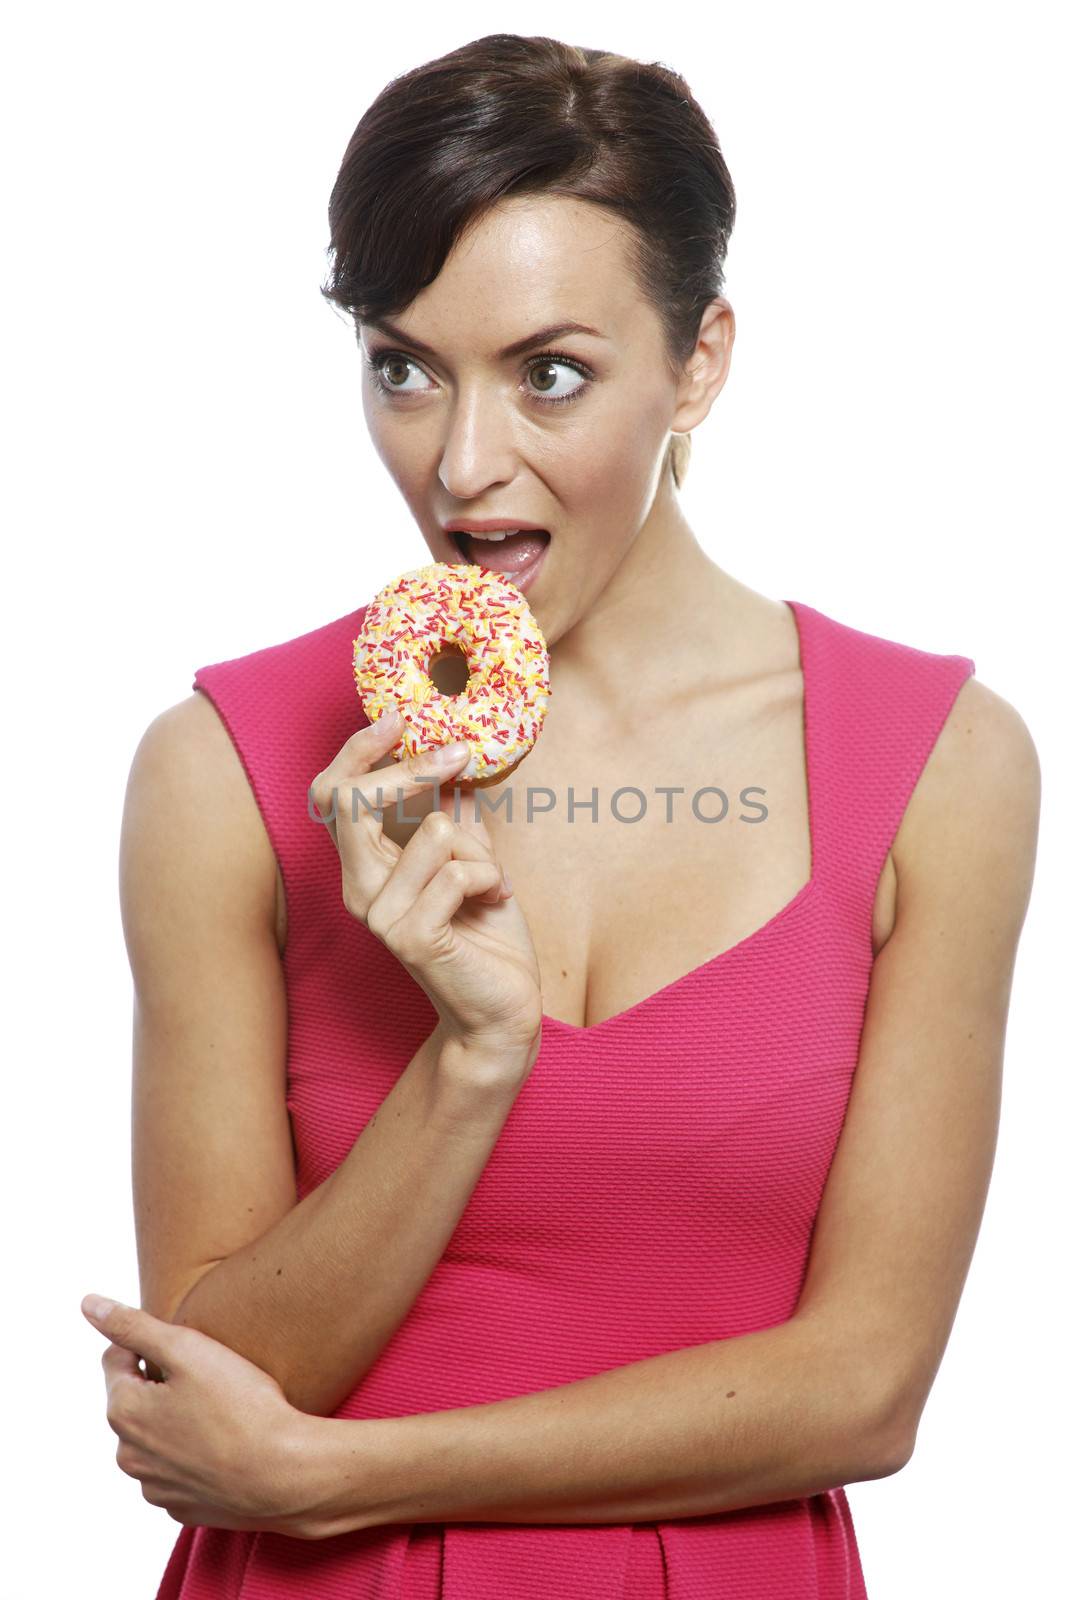 Young woman holding a doughnut looking guilty